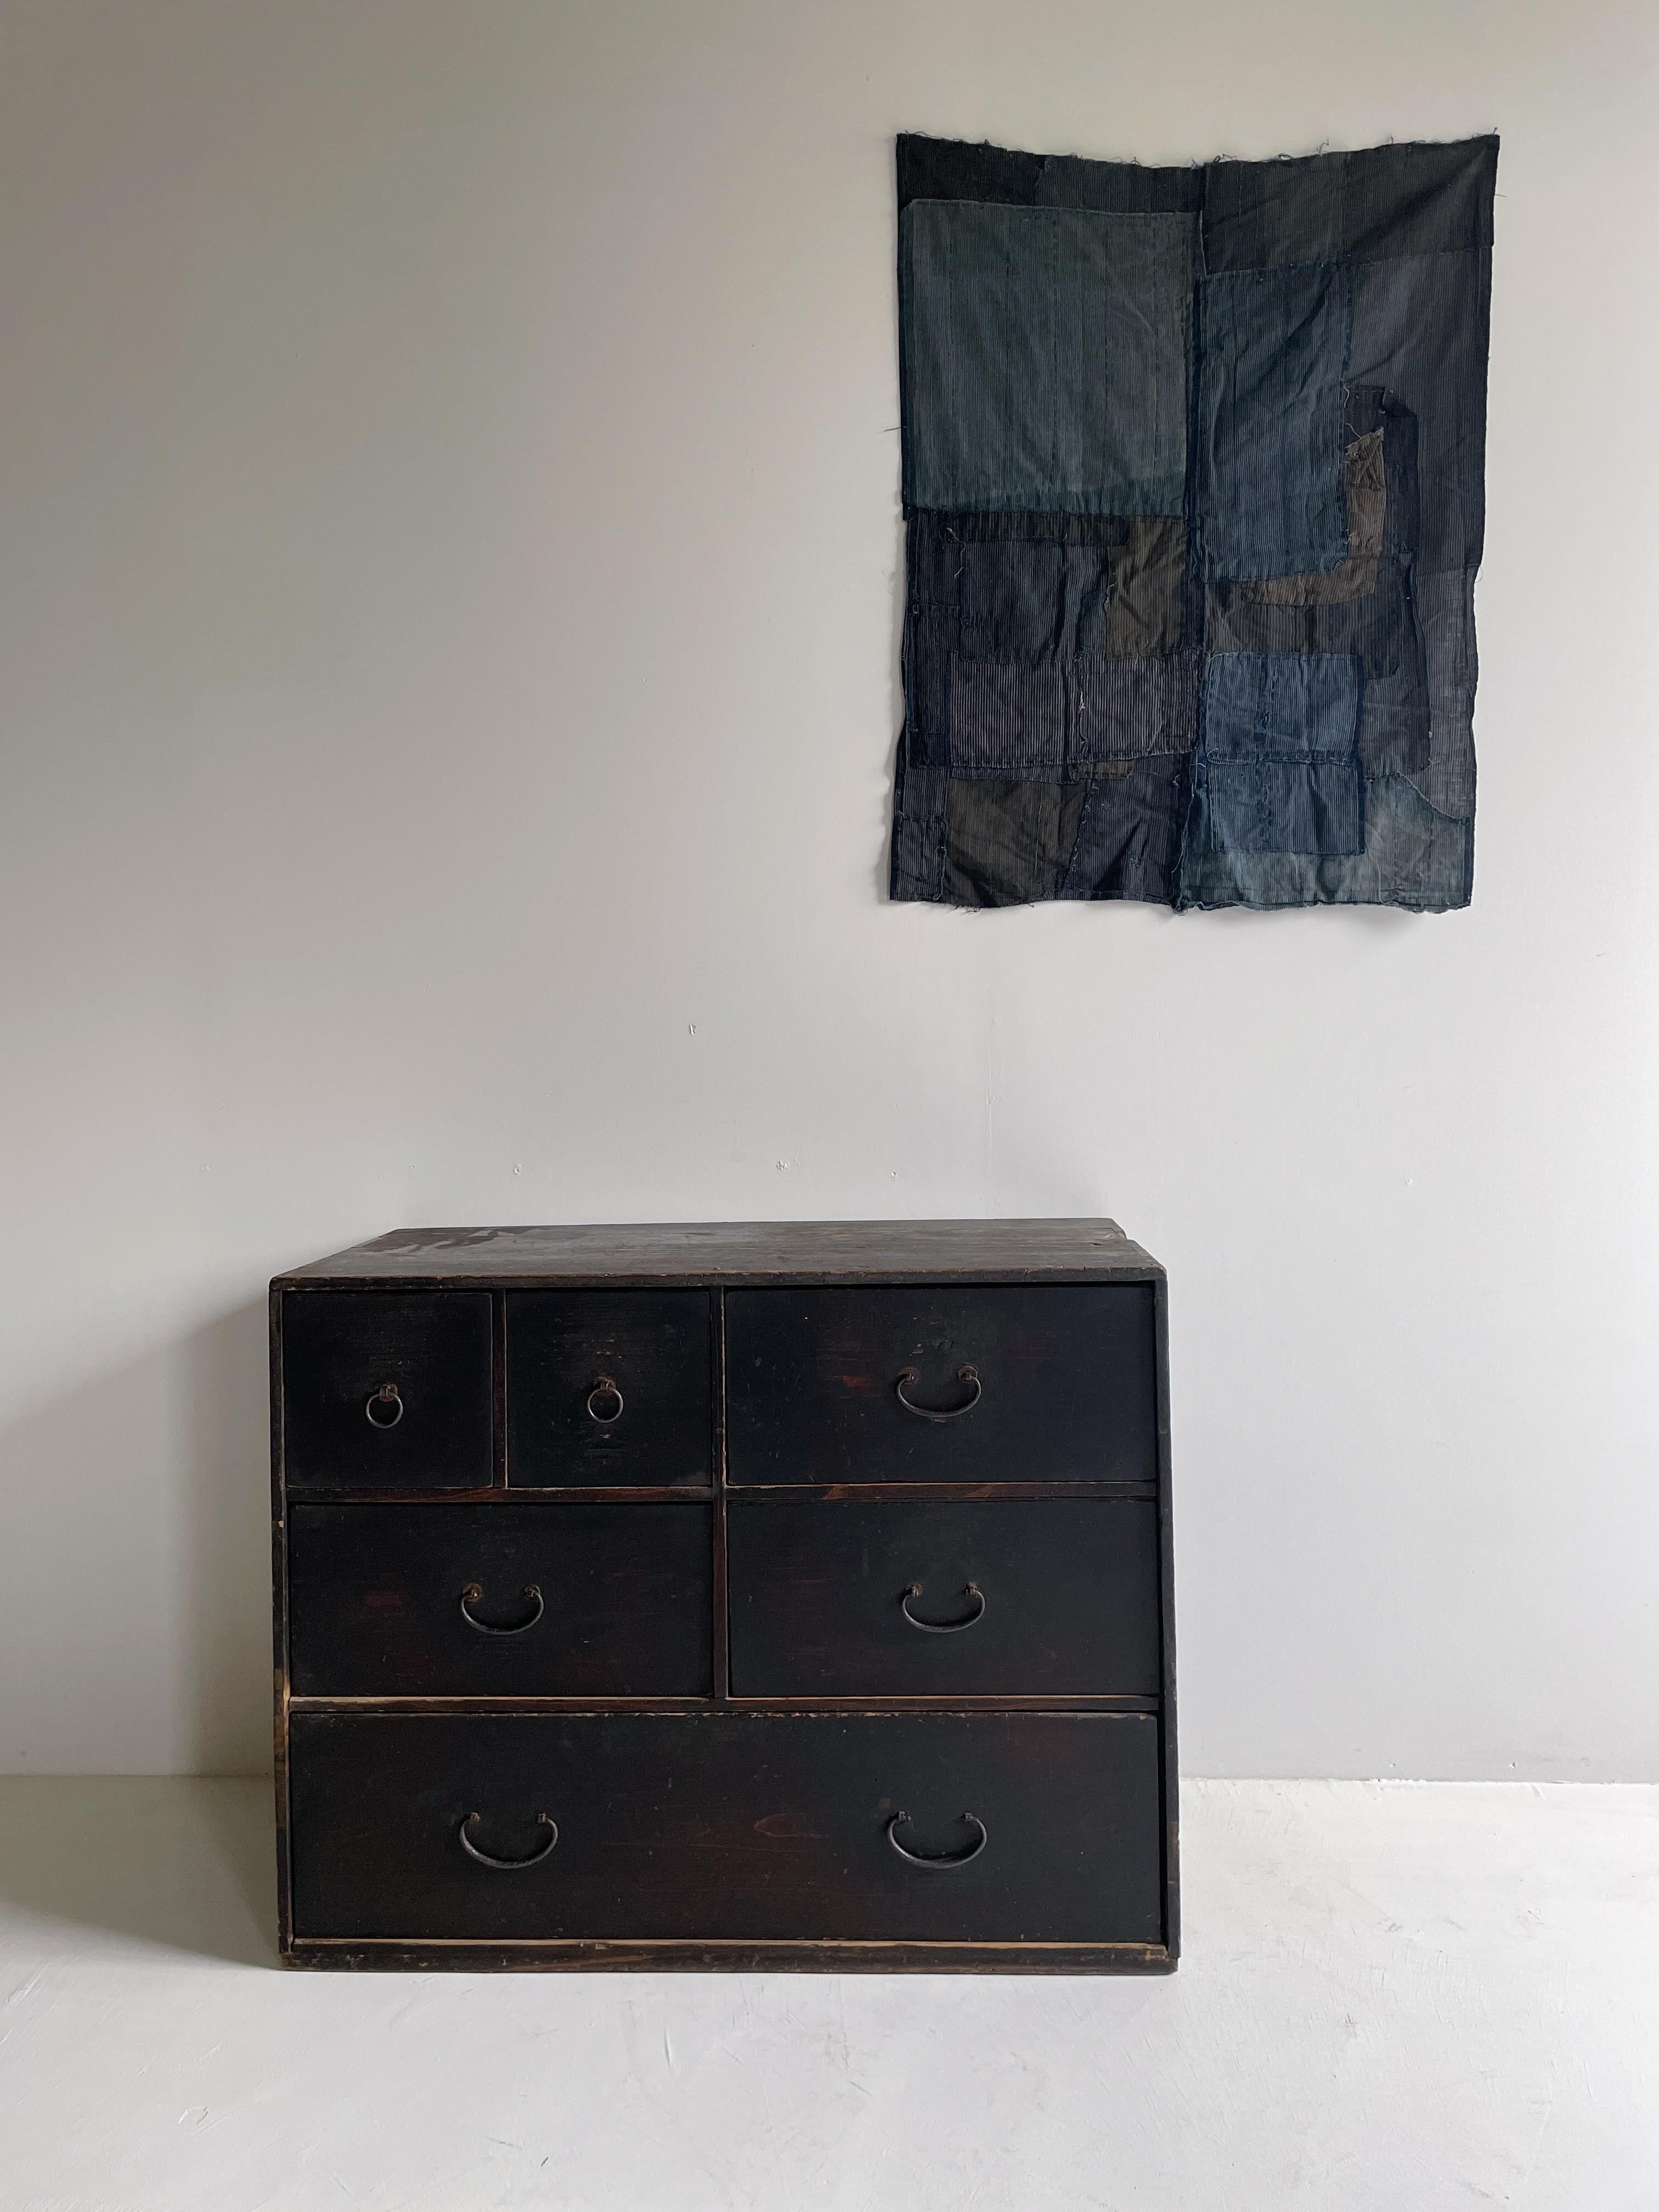 Very old large drawer storage made in Japan.
The furniture is from the Meiji period (1860s-1900s).
Material is cedar. The handles are made of iron.

The design is simple and lean.
It is a very beautiful piece of furniture with a uniquely Japanese